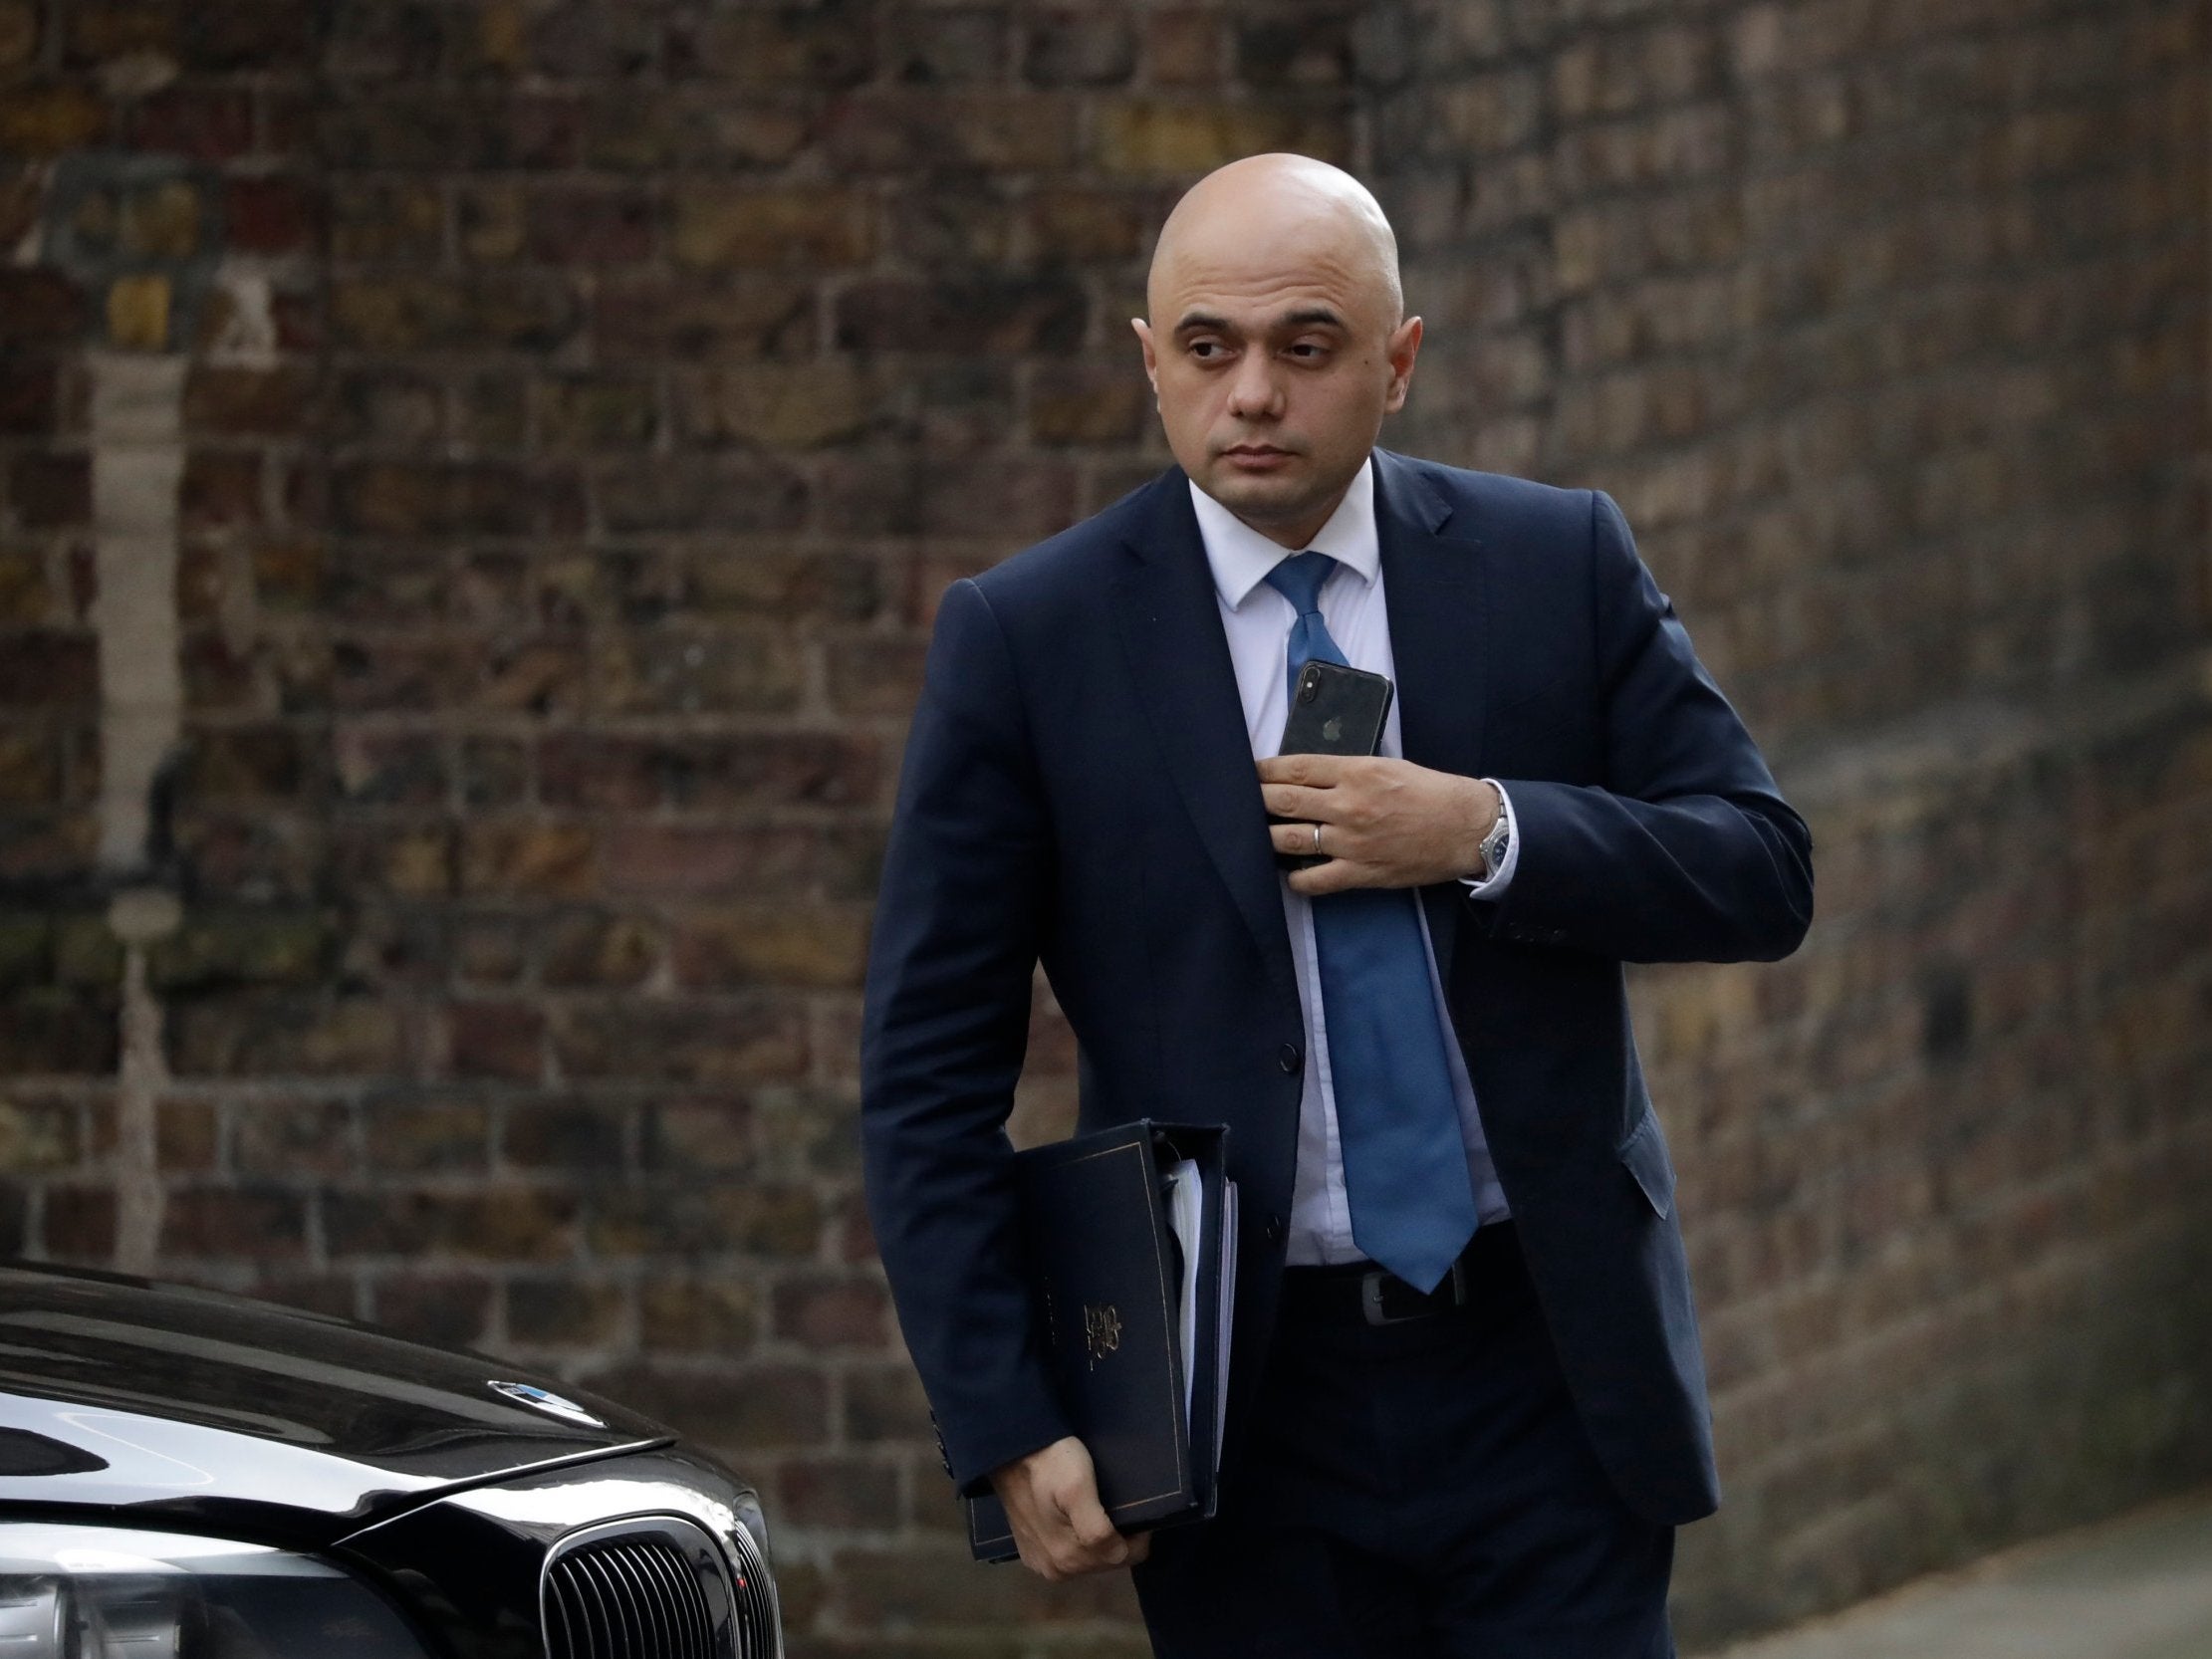 The home secretary receives abuse 'every day'